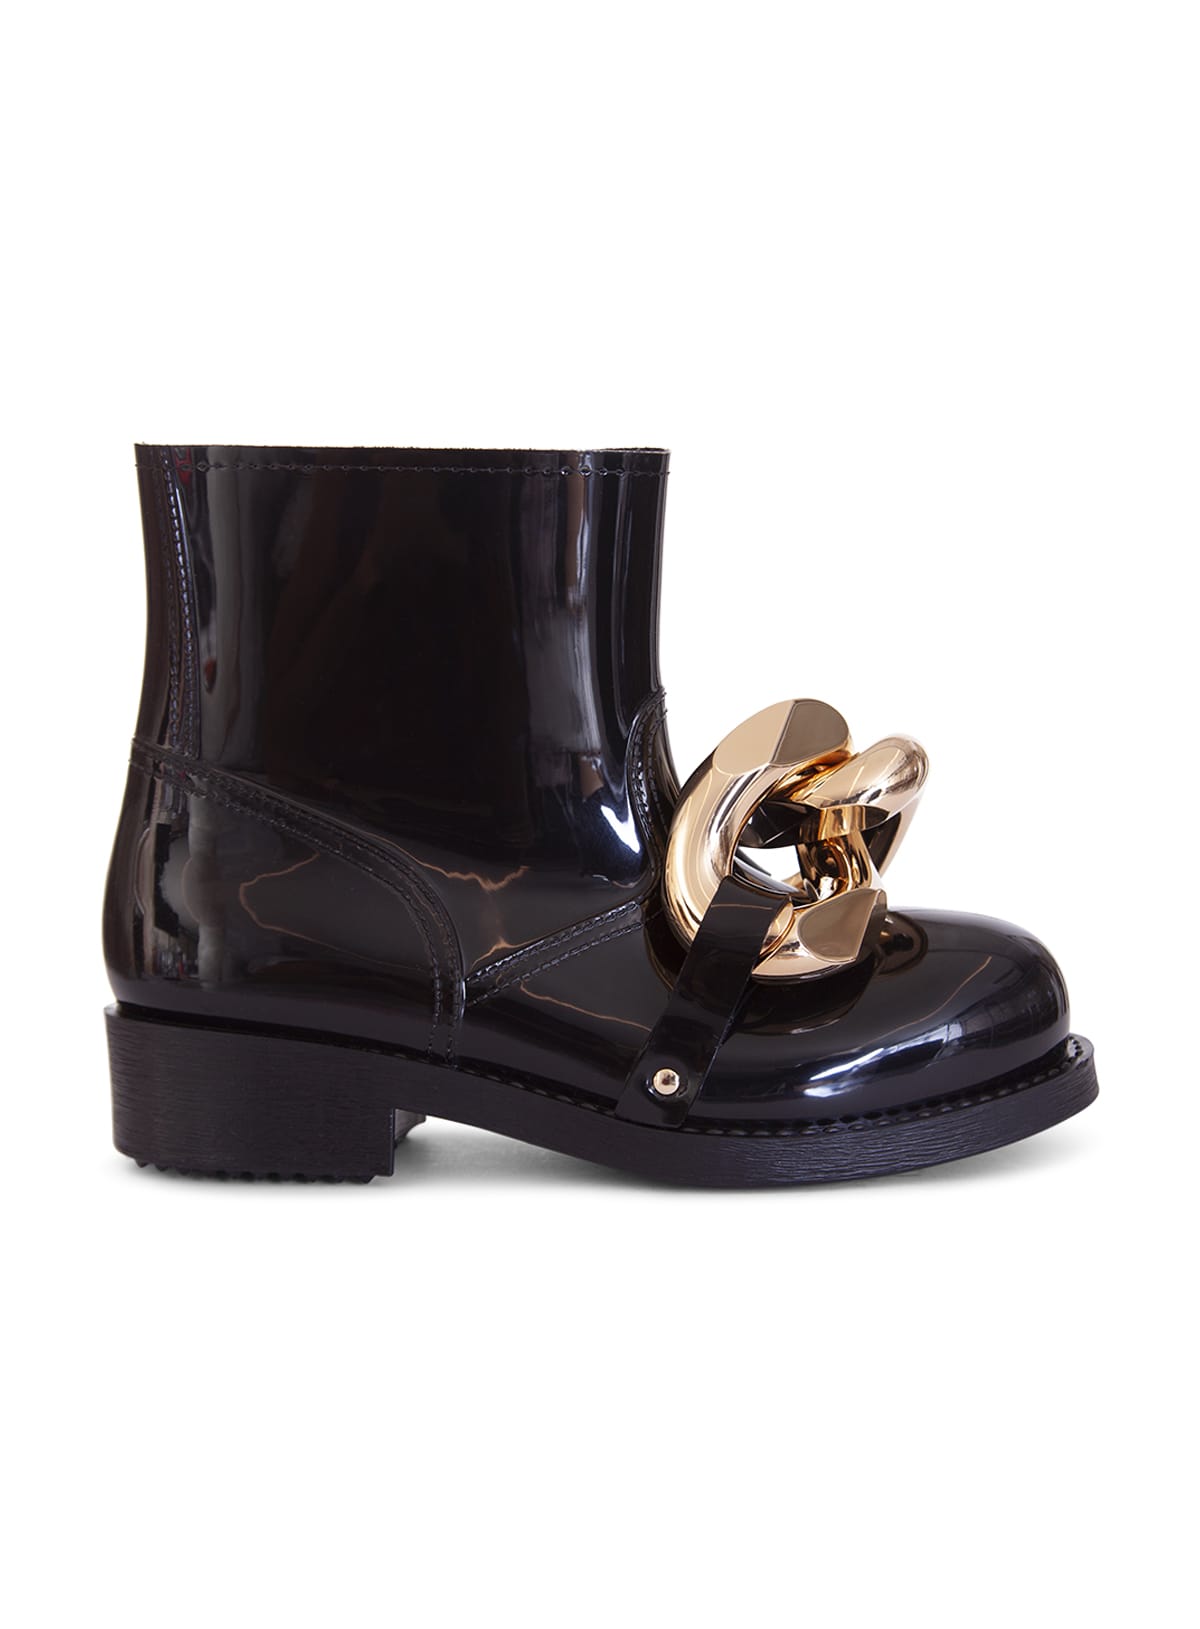 J.W. Anderson Jw Anderson chain Rubber Ankle Boots